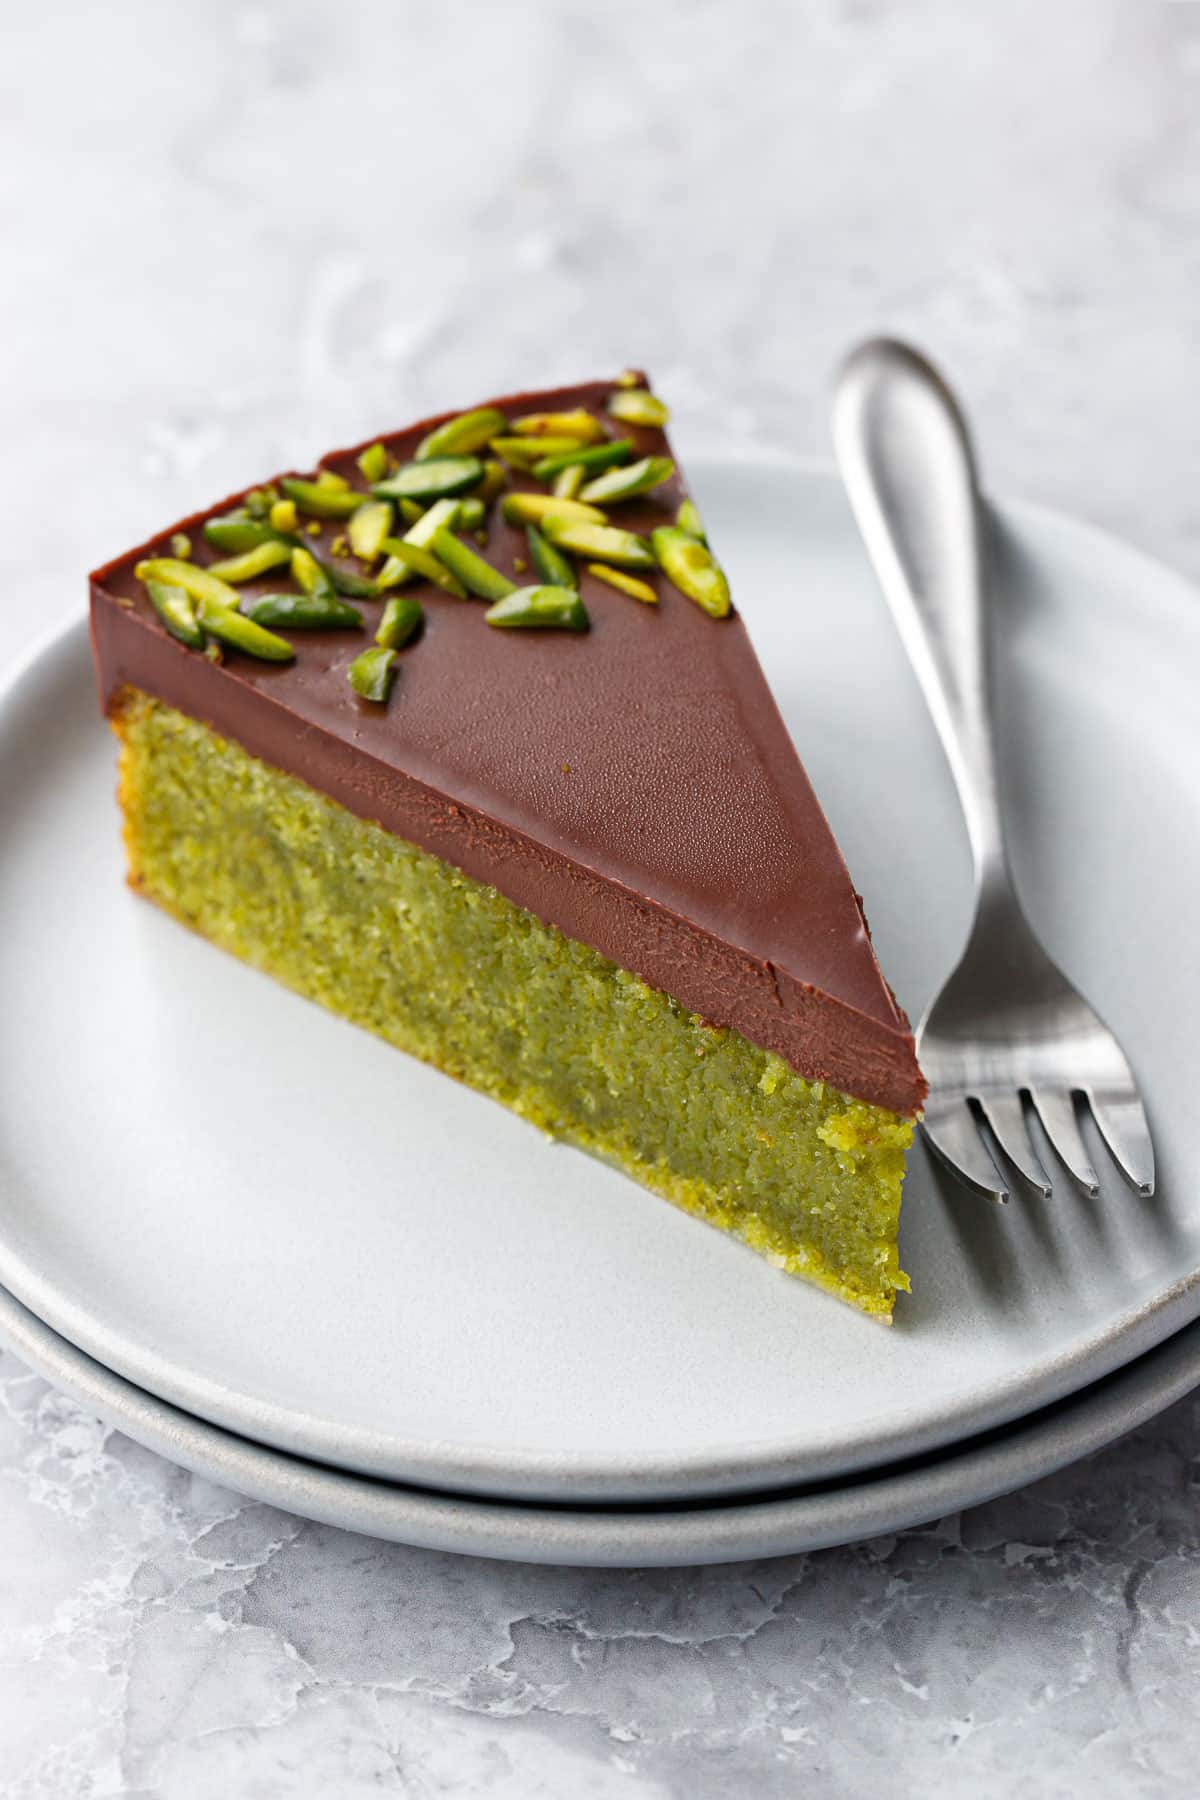 Closeup, cleanly cut slice of Flourless Pistachio Cake topped with Chocolate Ganache and slivered pistachios, on a stack of gray plates with a silver fork.